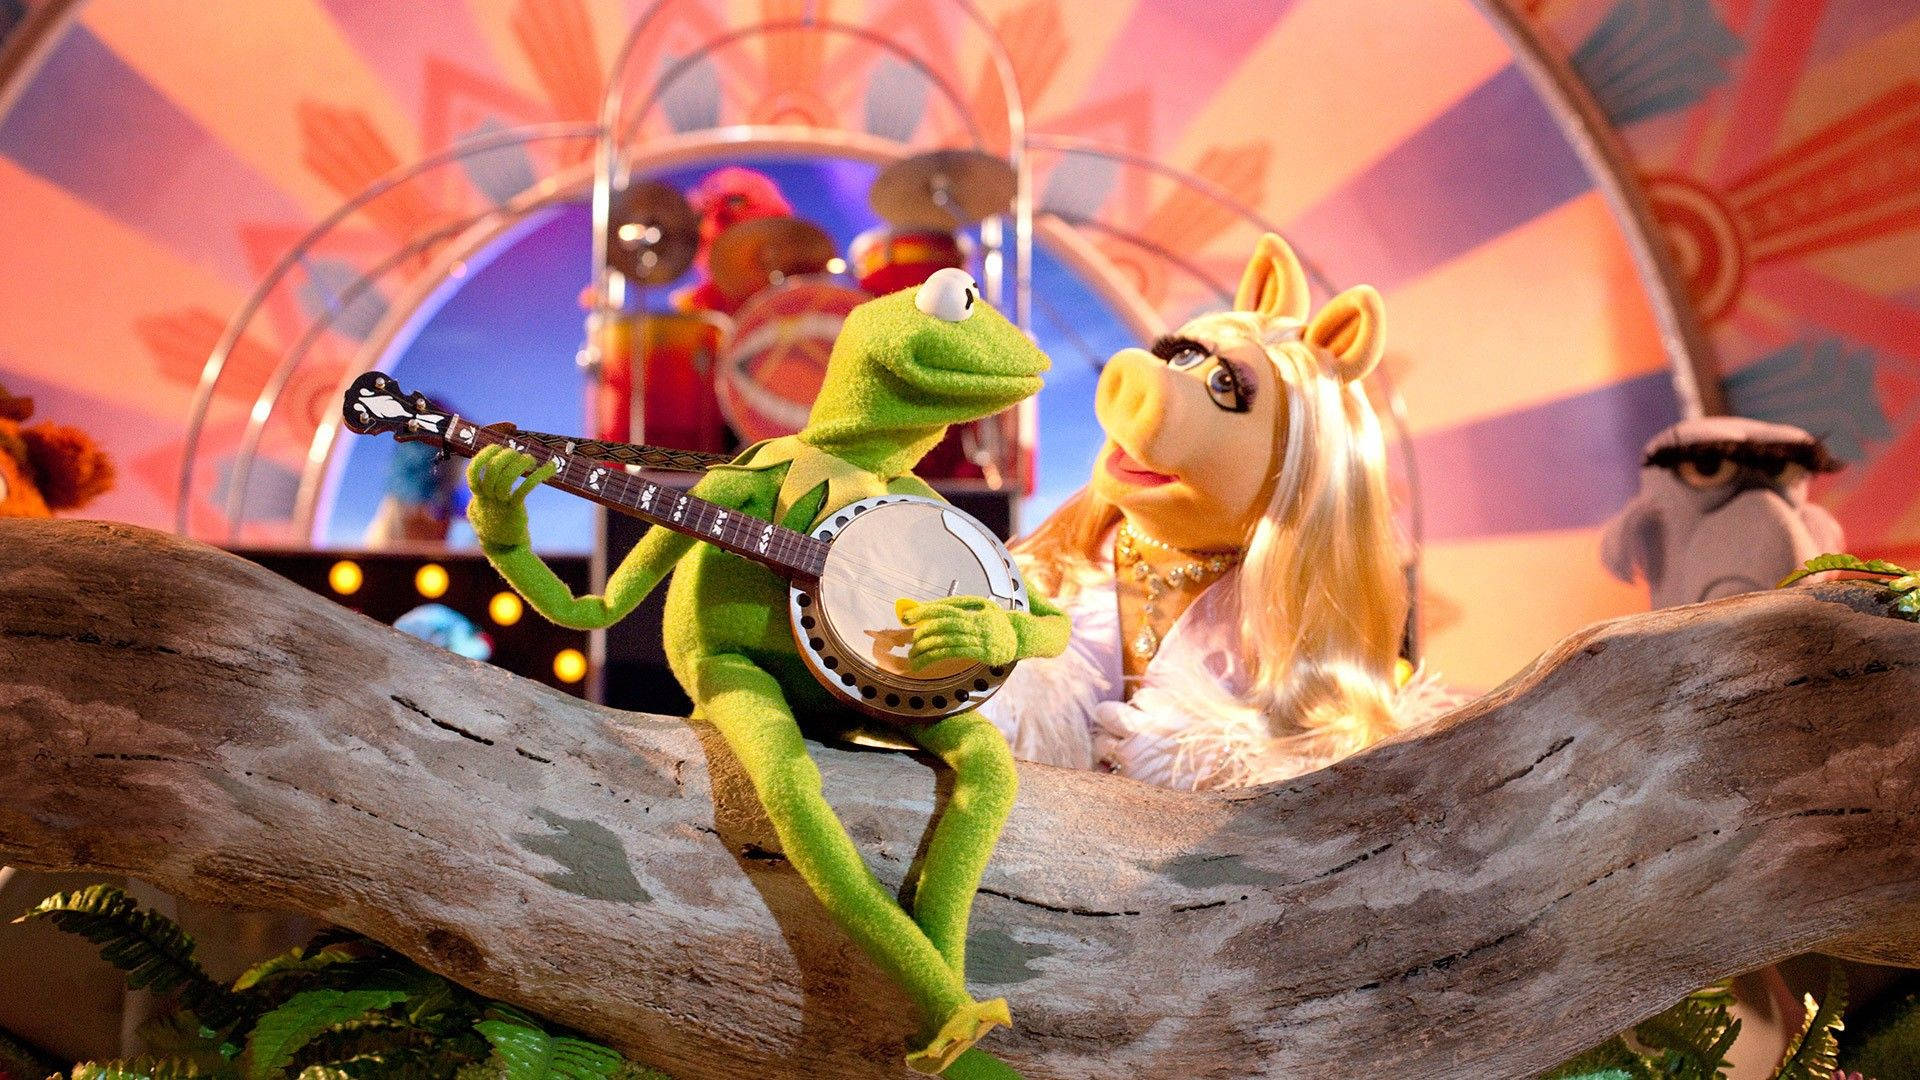 Miss Piggy Singing With Kermit Frog